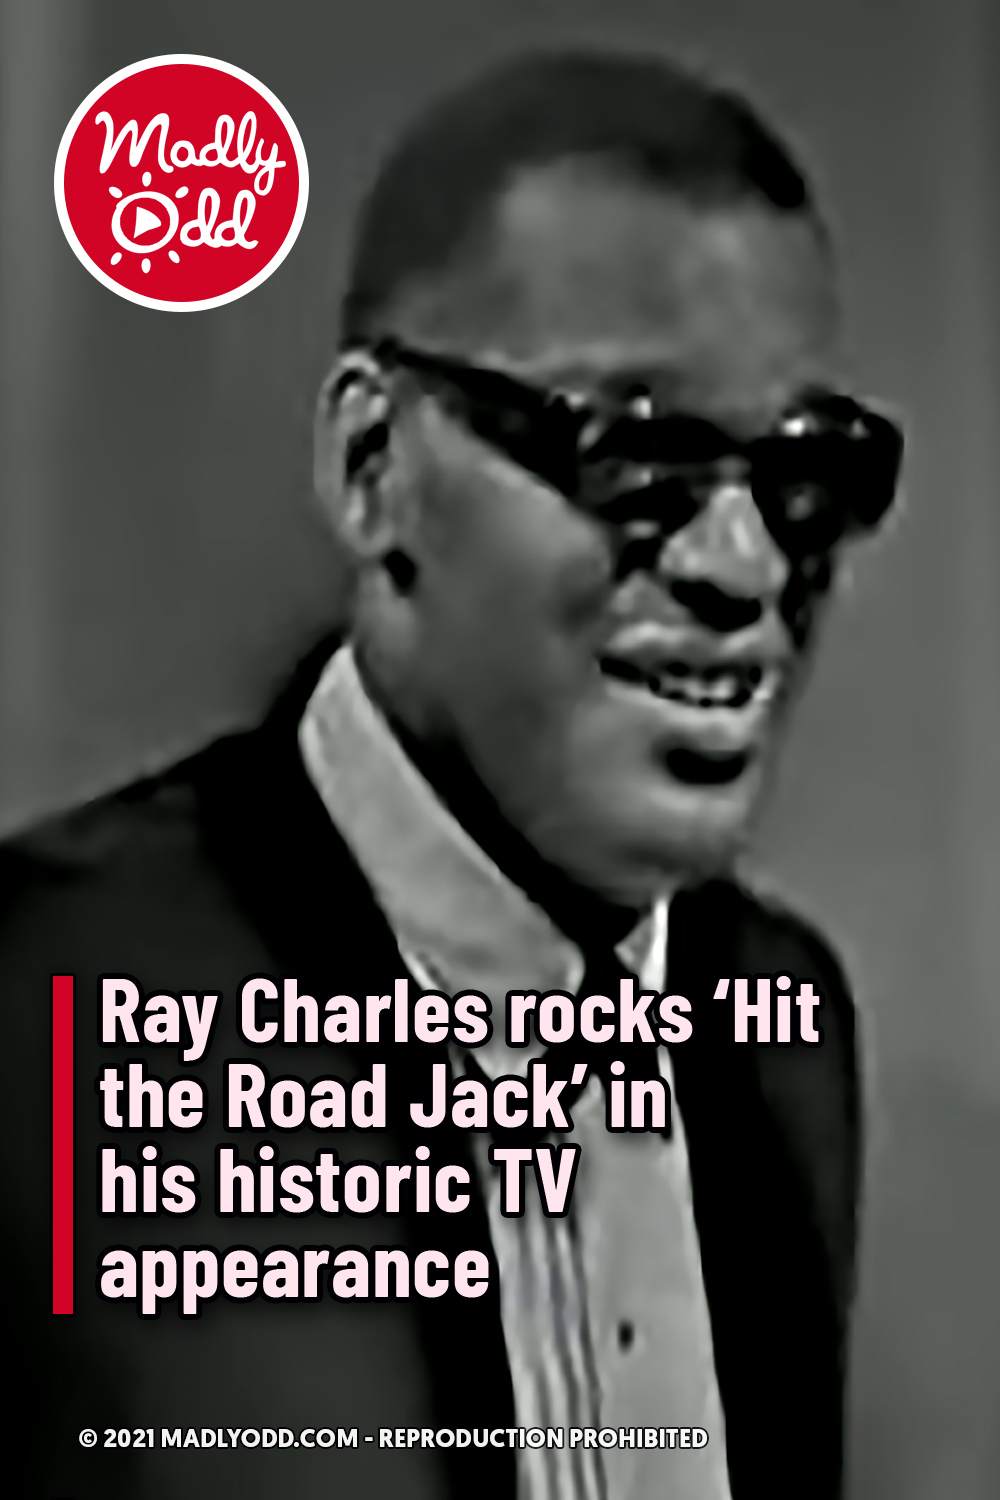 Ray Charles rocks ‘Hit the Road Jack’ in his historic TV appearance